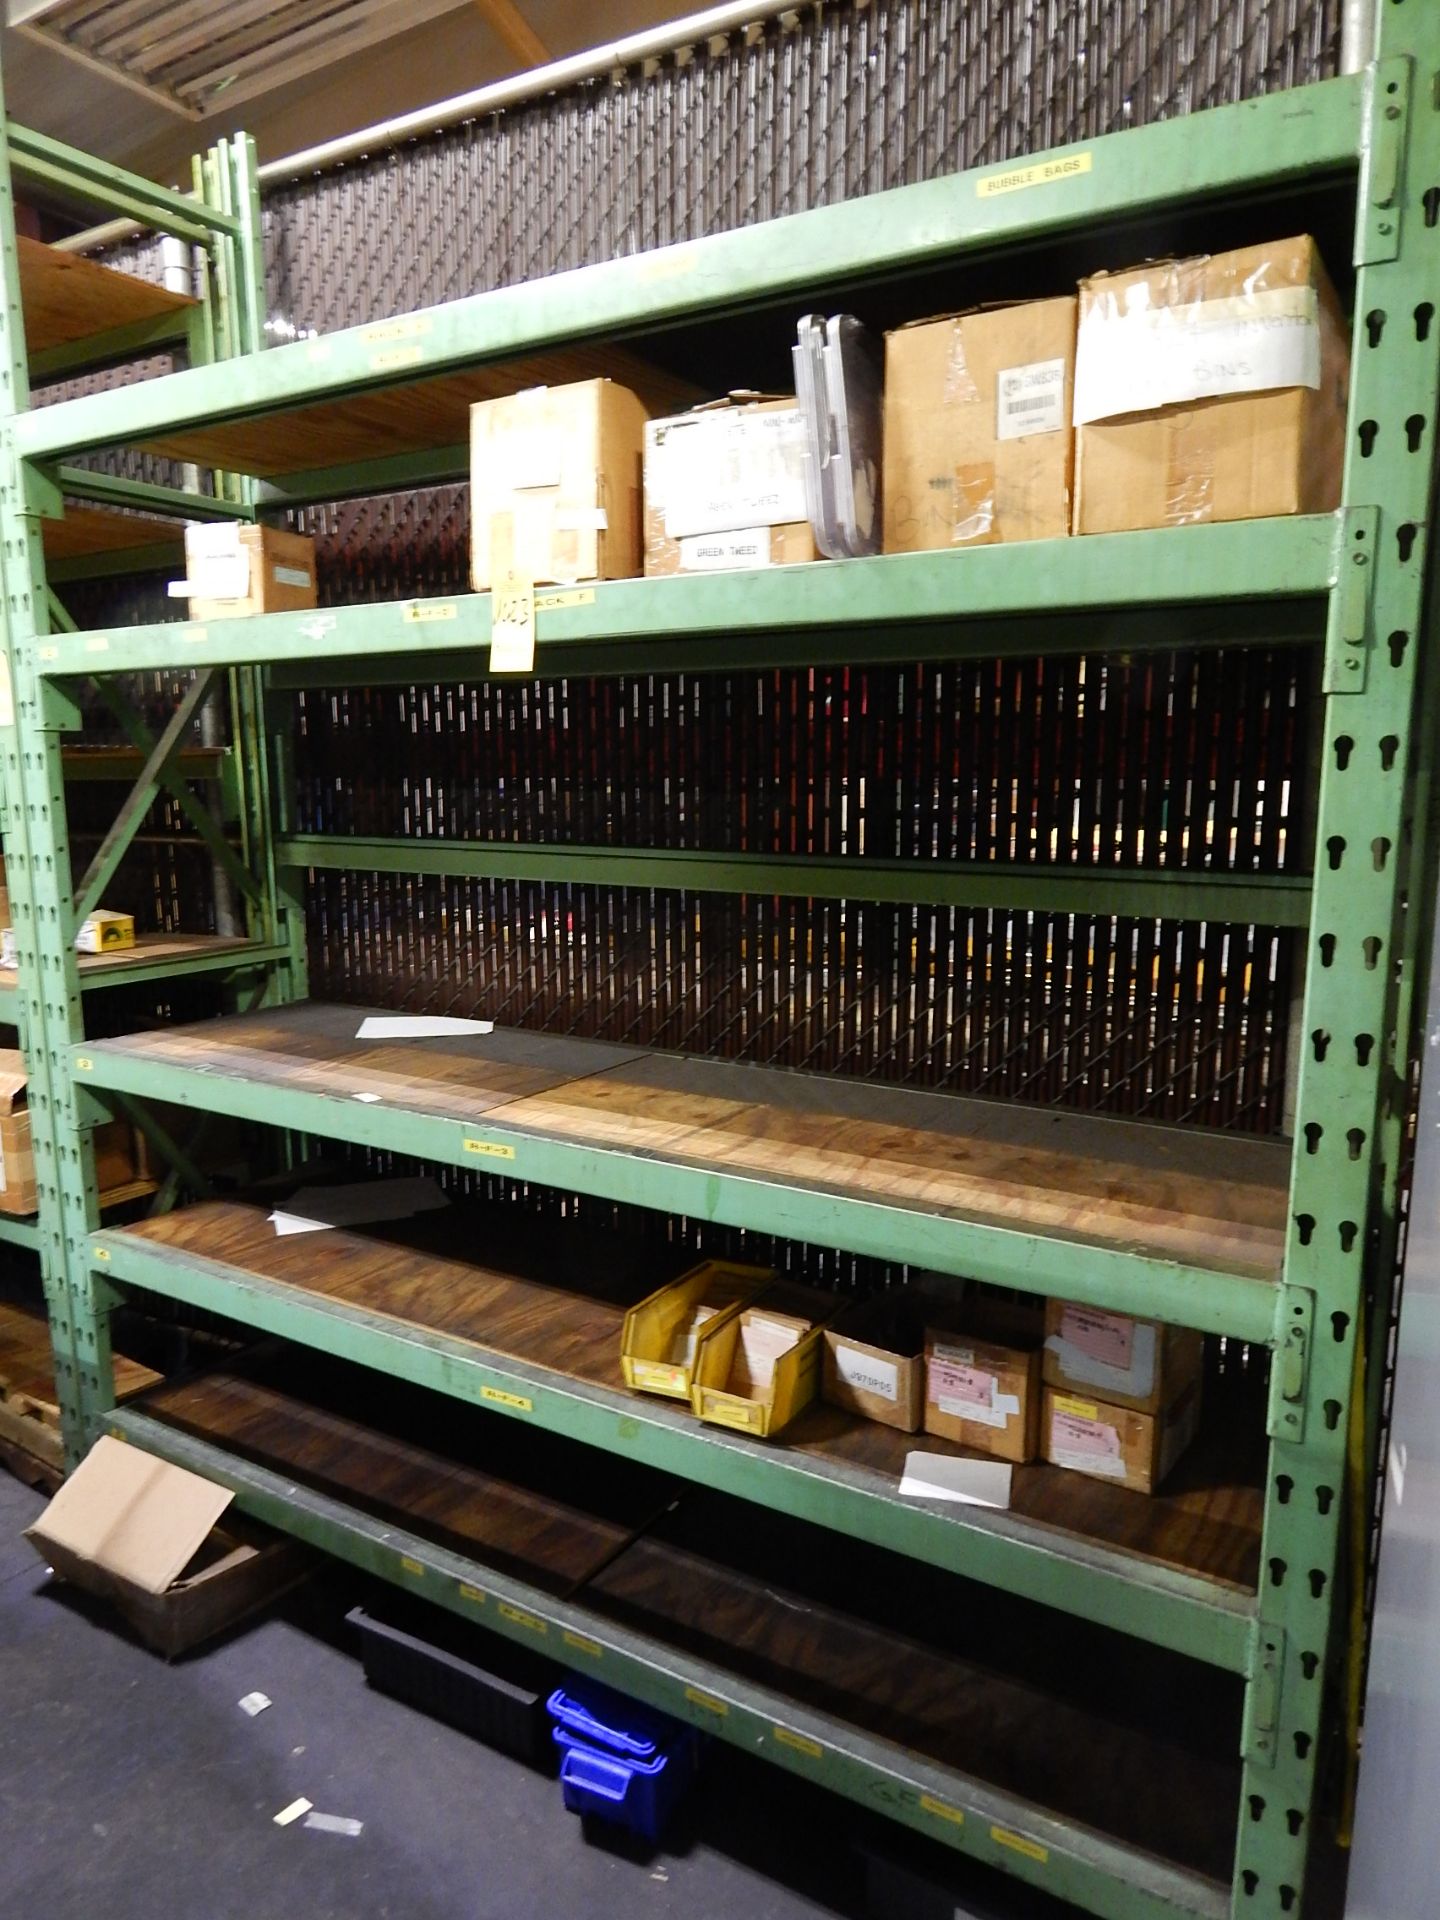 Pallet Shelving,(1) Section, 2 Uprights, 10 Cross Beams, 10' Height, 24" Deep, 96" Wide, 3" Beams